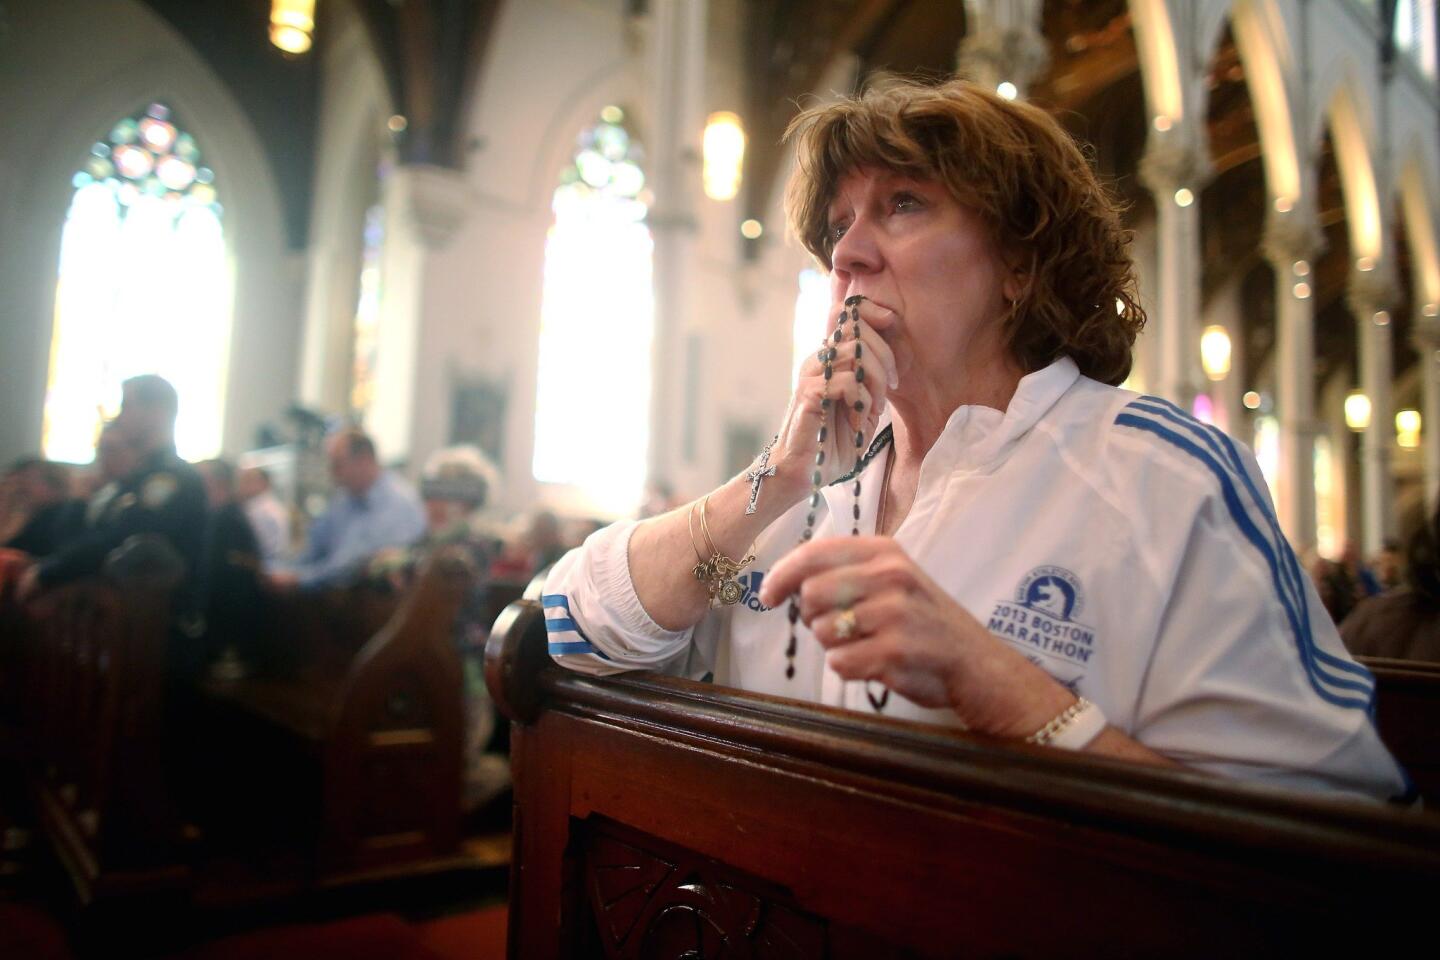 Sunday services held in honor of Boston bombing victims